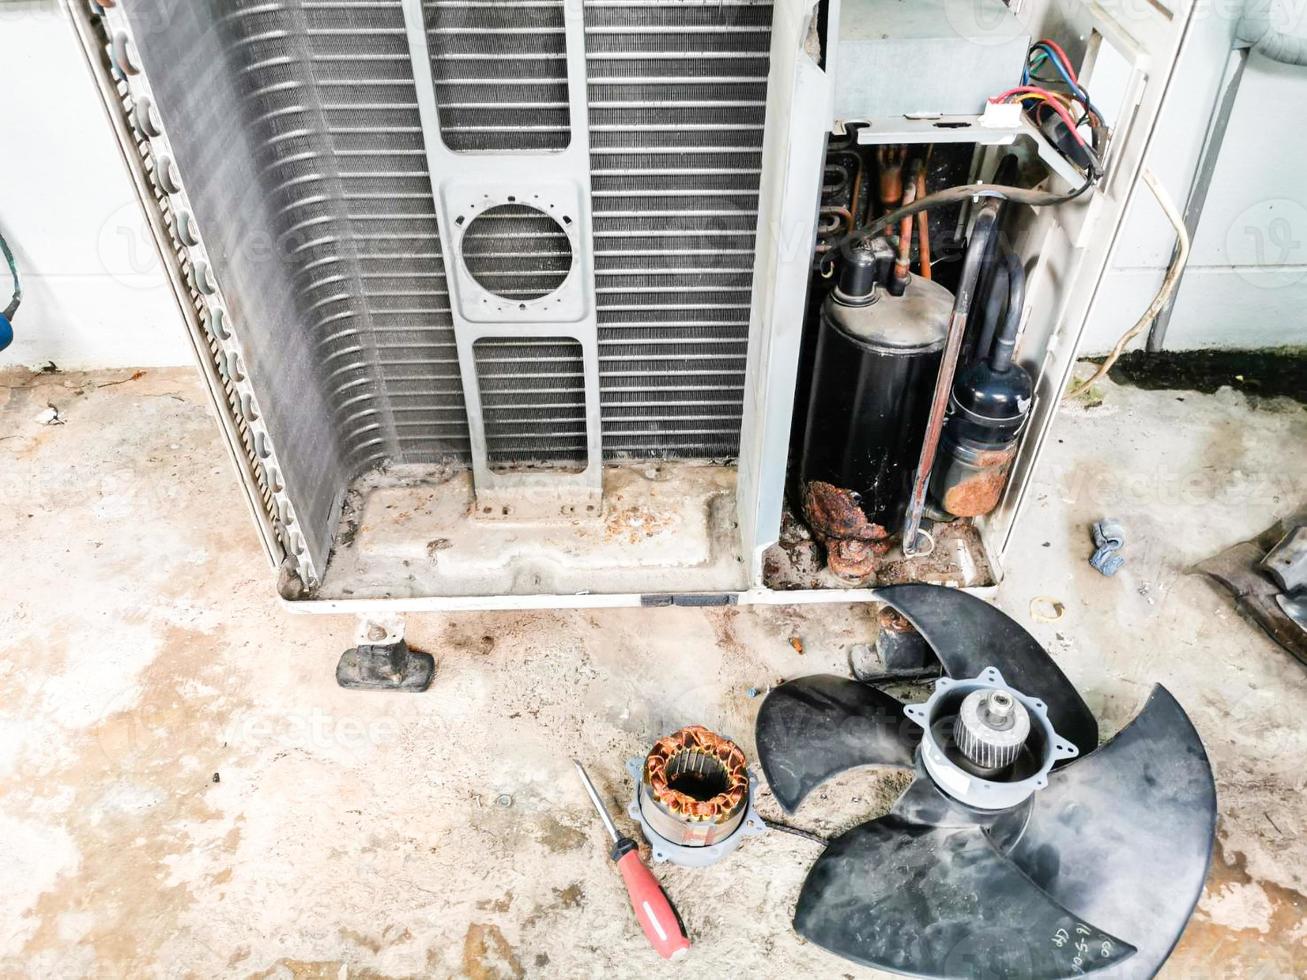 Maintenance of the air conditioner by replacing the fan motor. Mechanics use a flat screwdriver for removing the cover of the machine, and it is very easy. photo